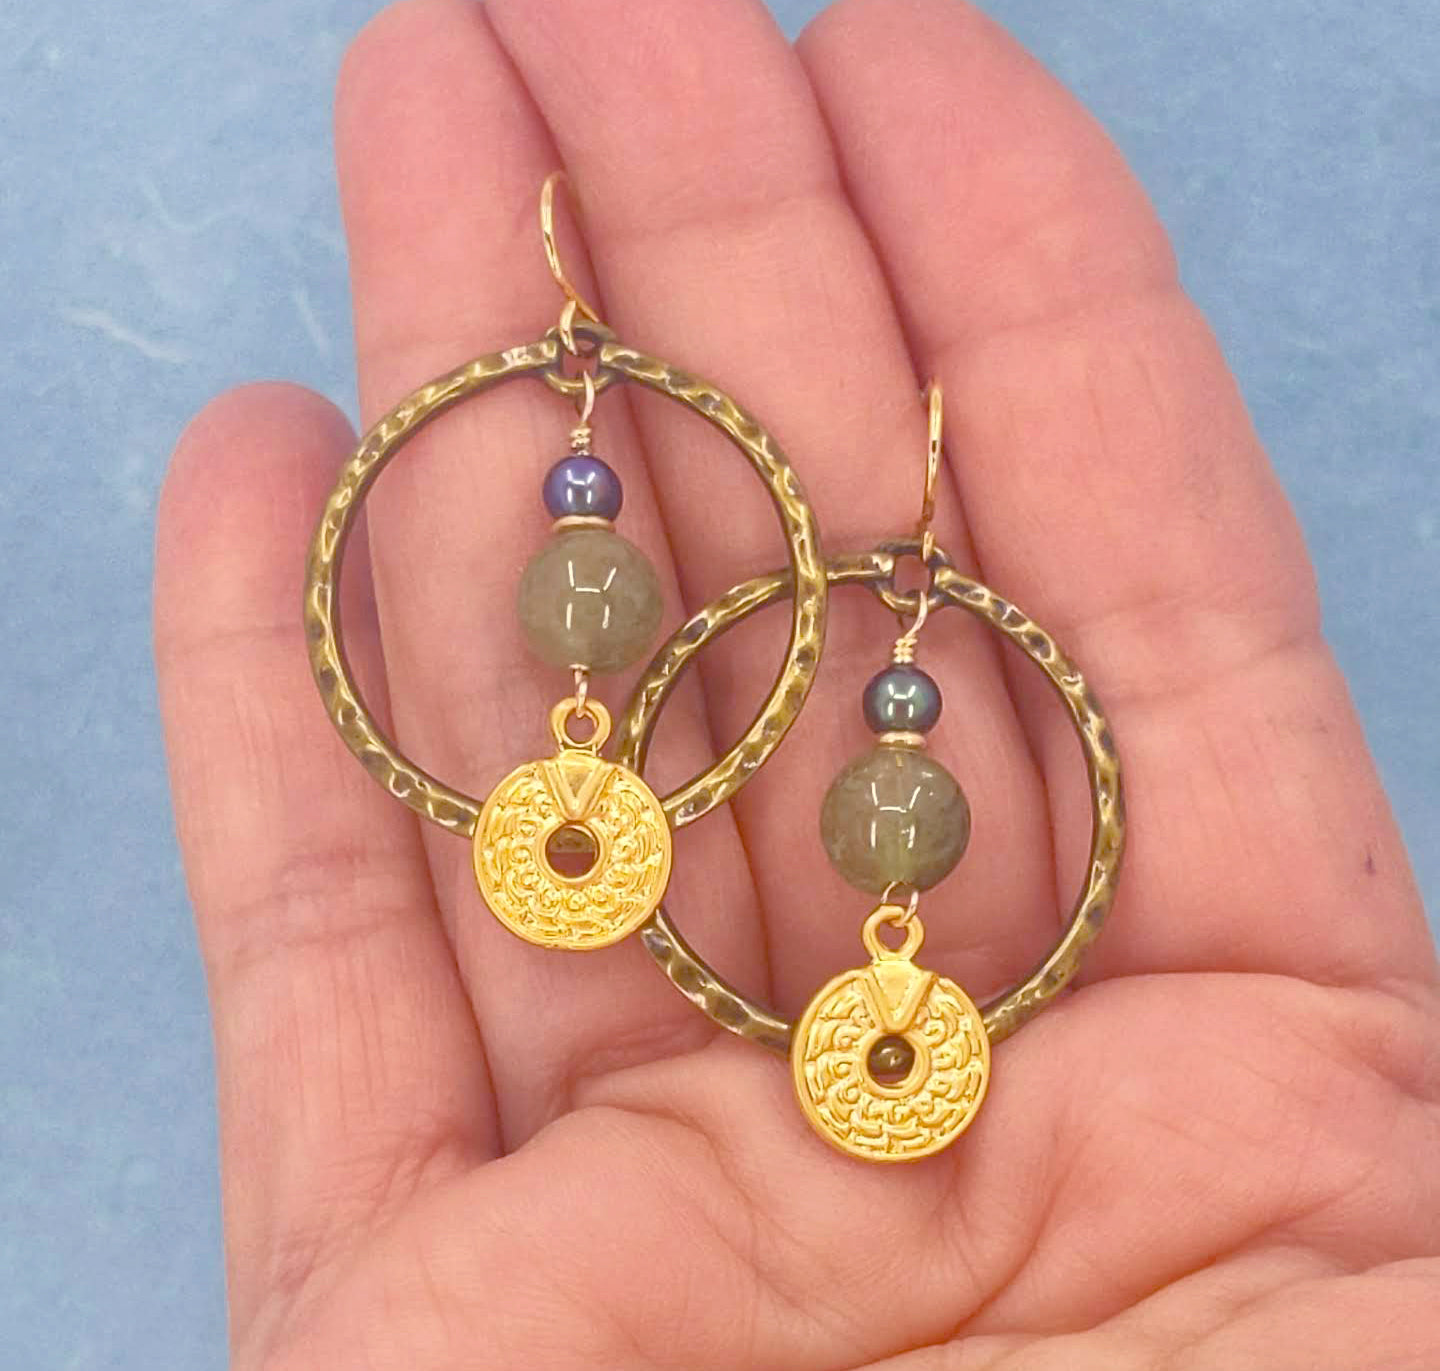 Circles and Stones Earrings